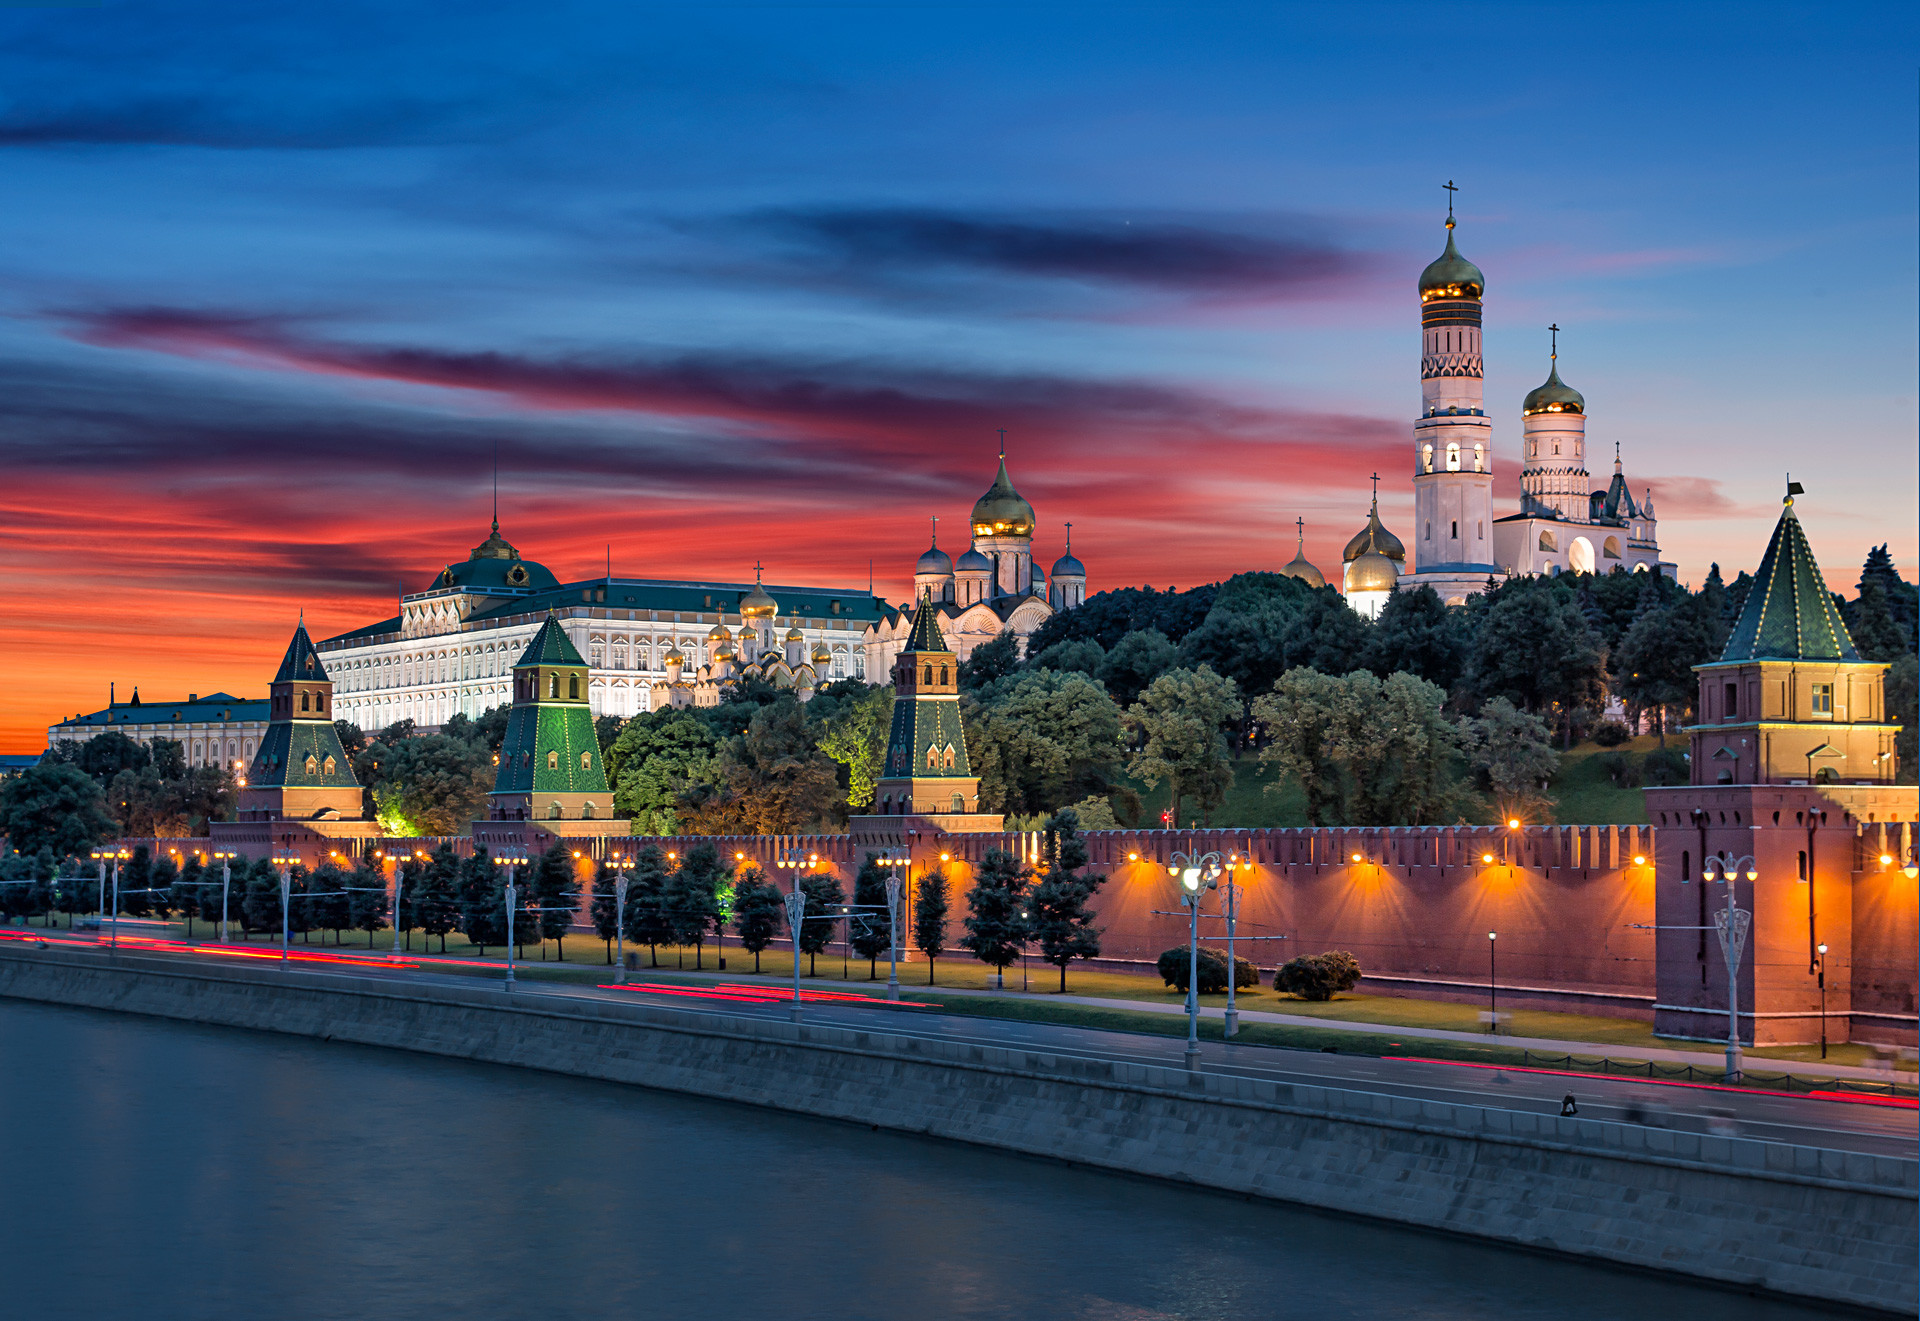 View of Kremlin churches and towers from Moscow River Bridge.